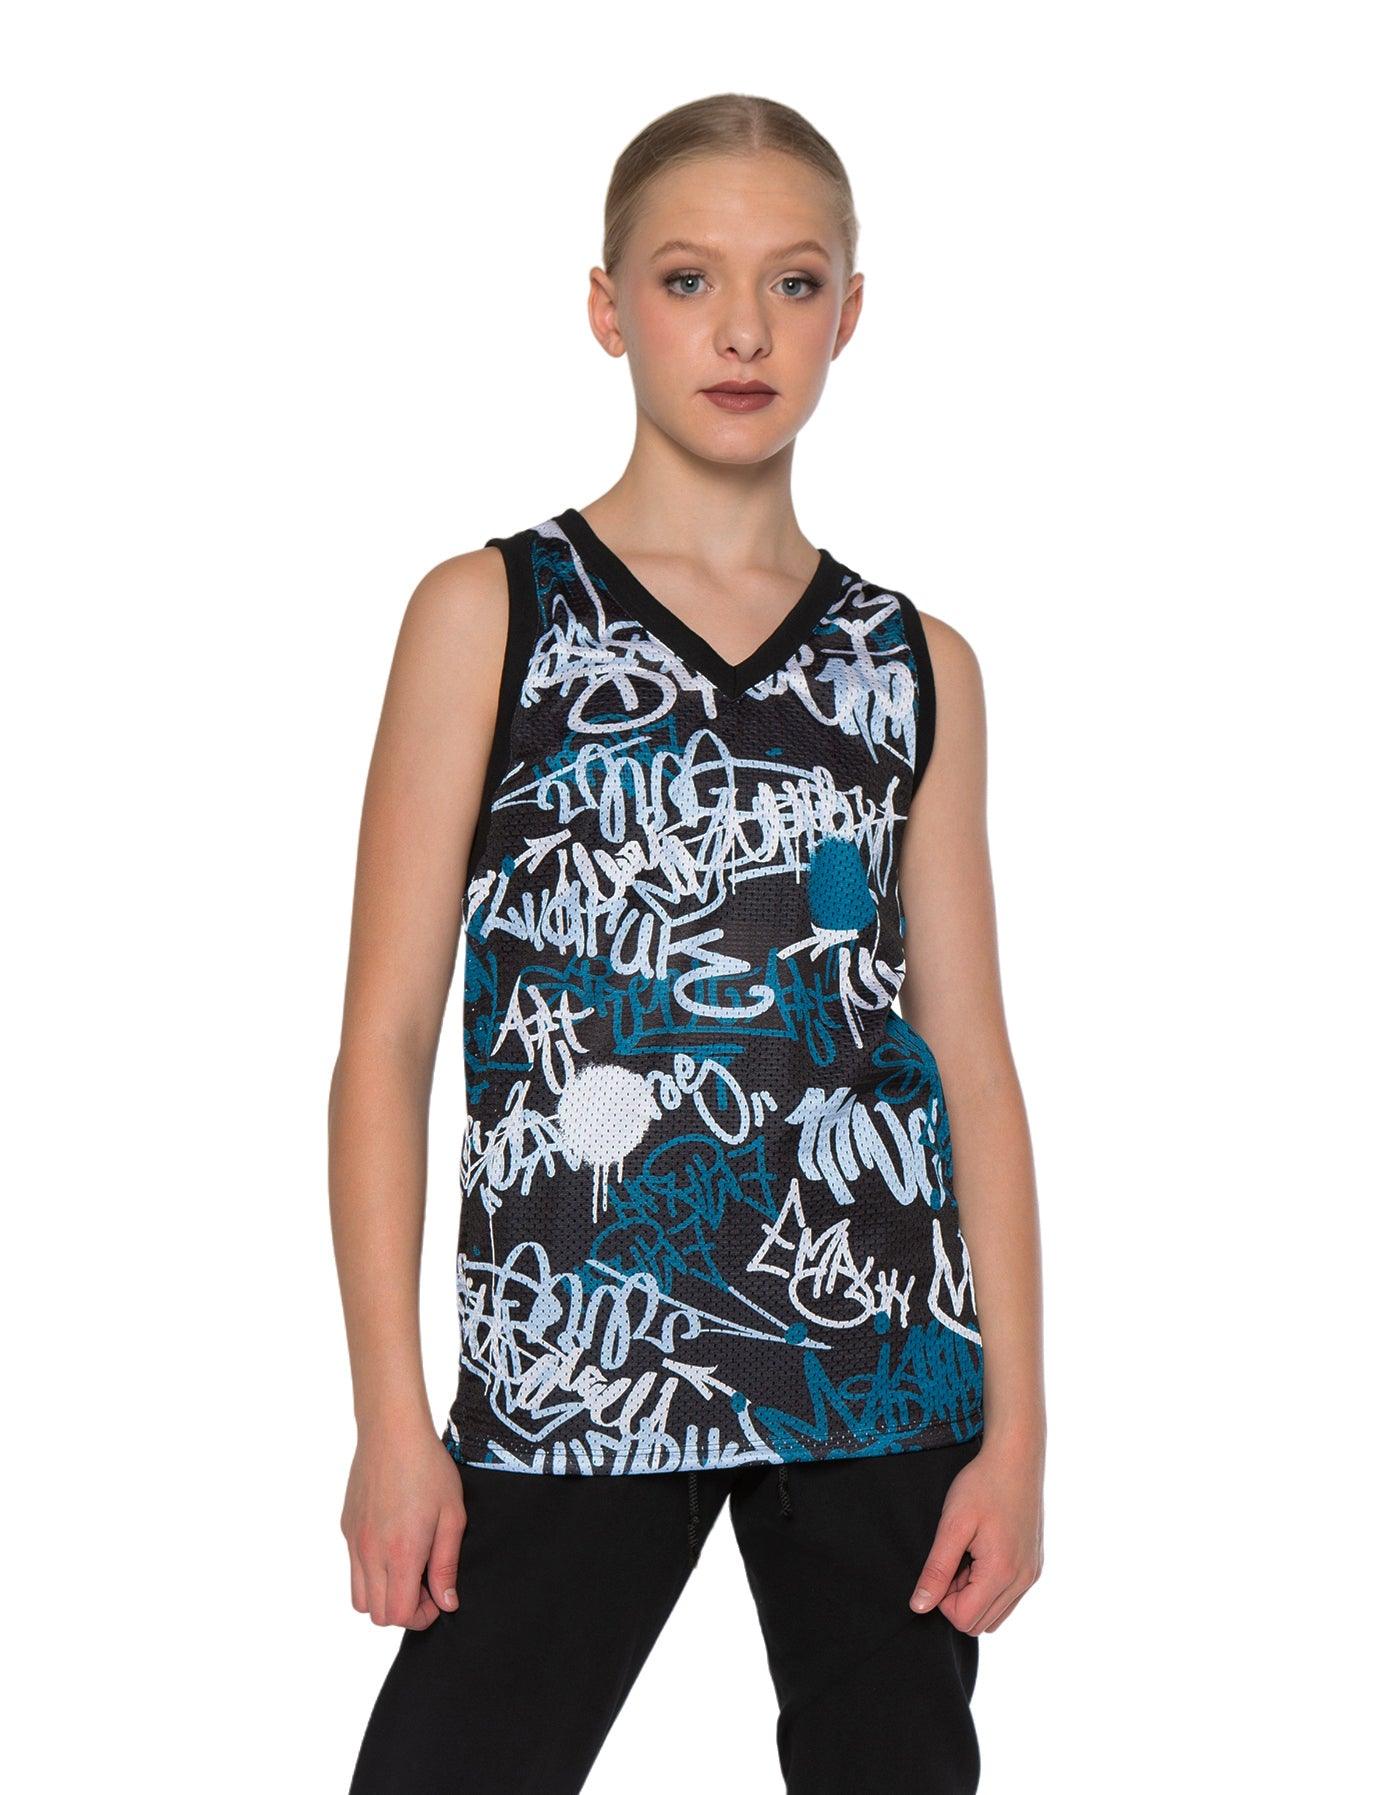 Tagged Basketball Jersey - Hamilton Theatrical